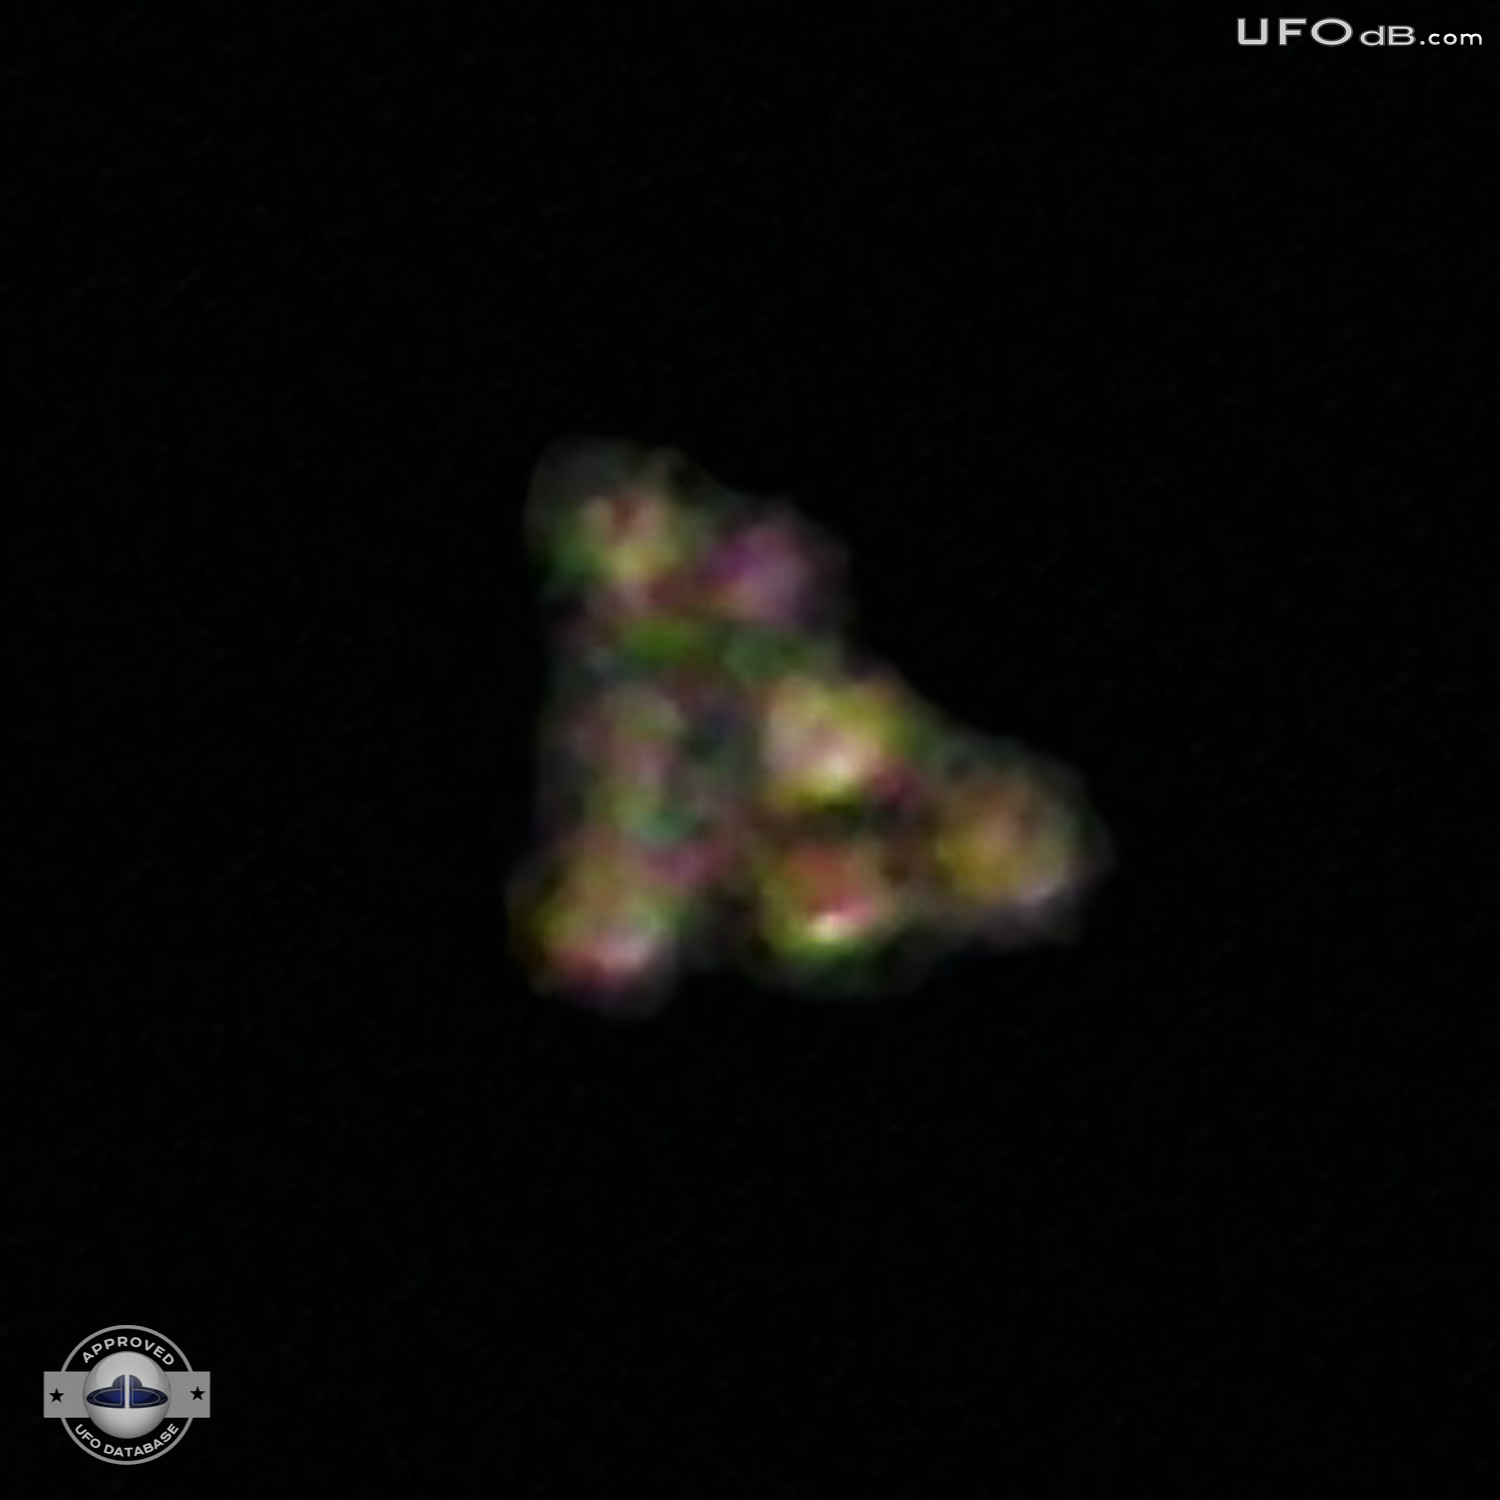 Santa Cruz mountains visited by a Triangular UFO | USA | May 9 2011 UFO Picture #291-2